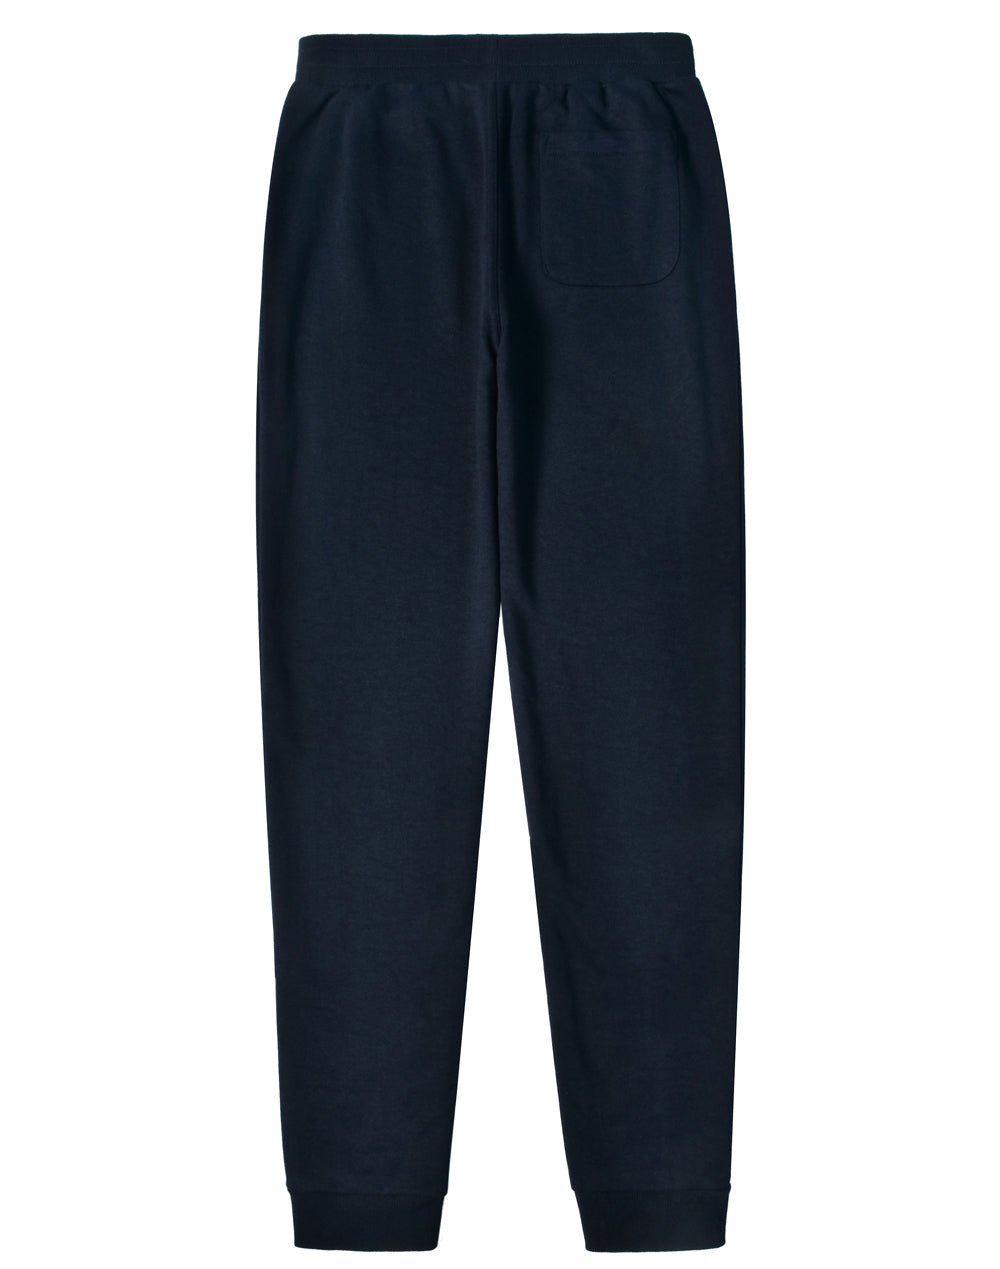 TP25 ADULTS FRENCH TERRY TRACK PANTS - WEARhouse